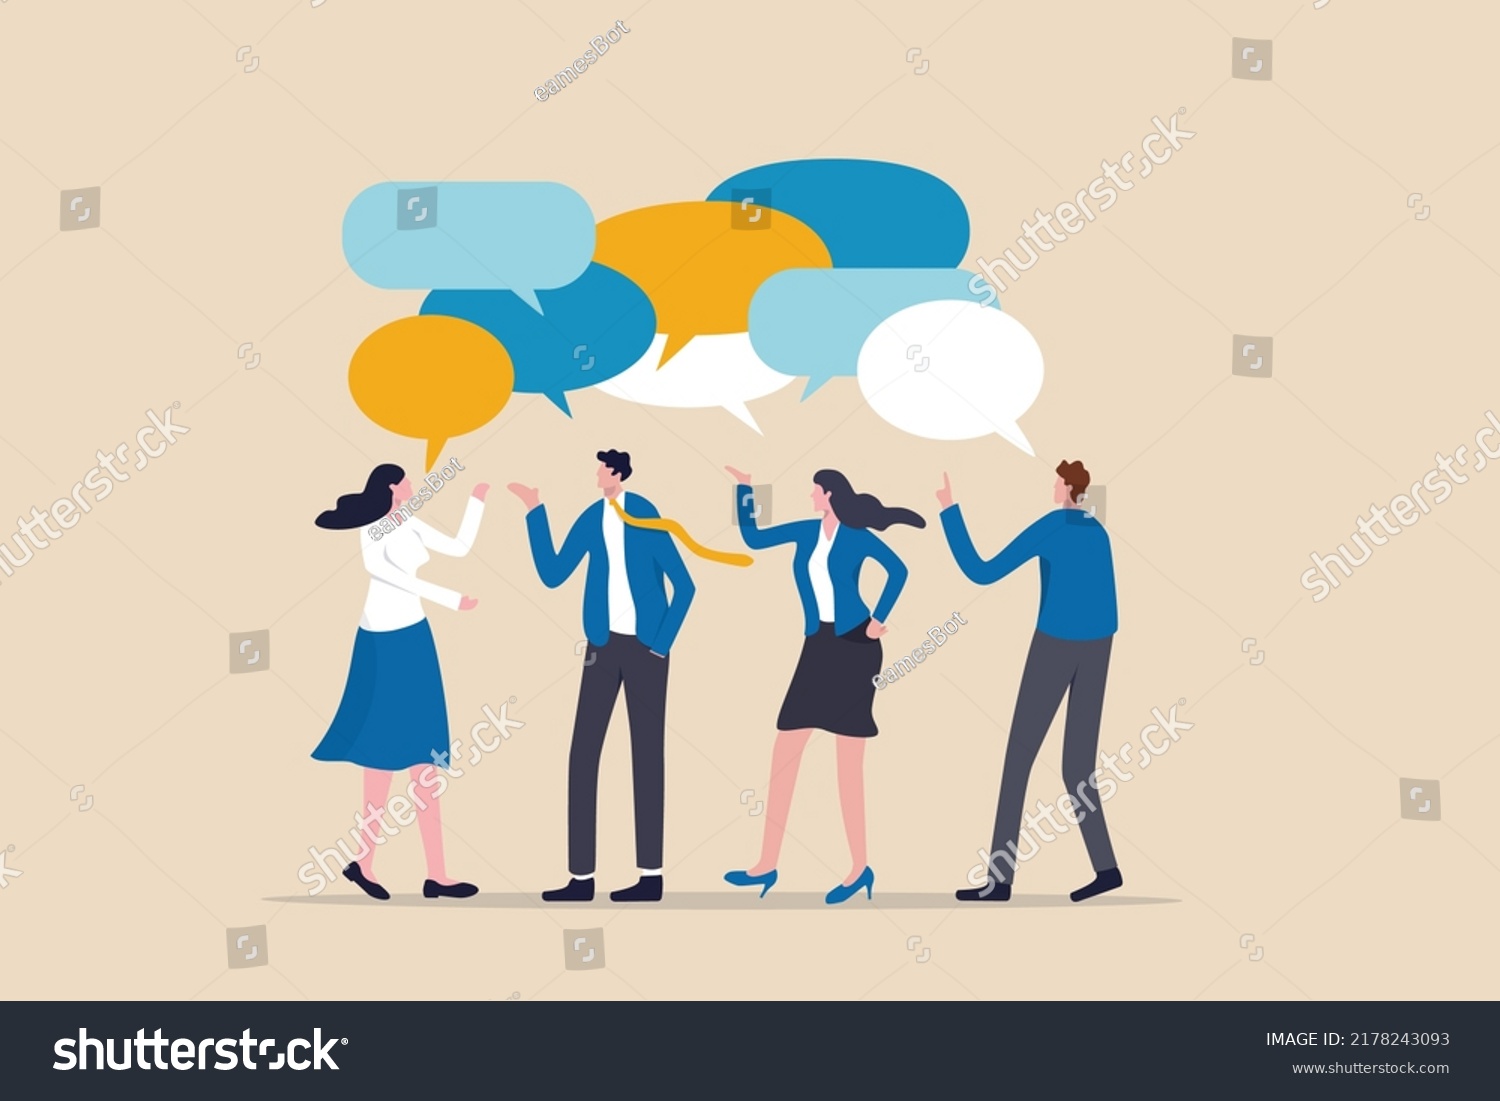 SVG of Discussion, conversation or brainstorming for idea, meeting, debate or team communication, colleague chatting, opinion concept, business team coworker discussing work in meeting with speech bubbles. svg